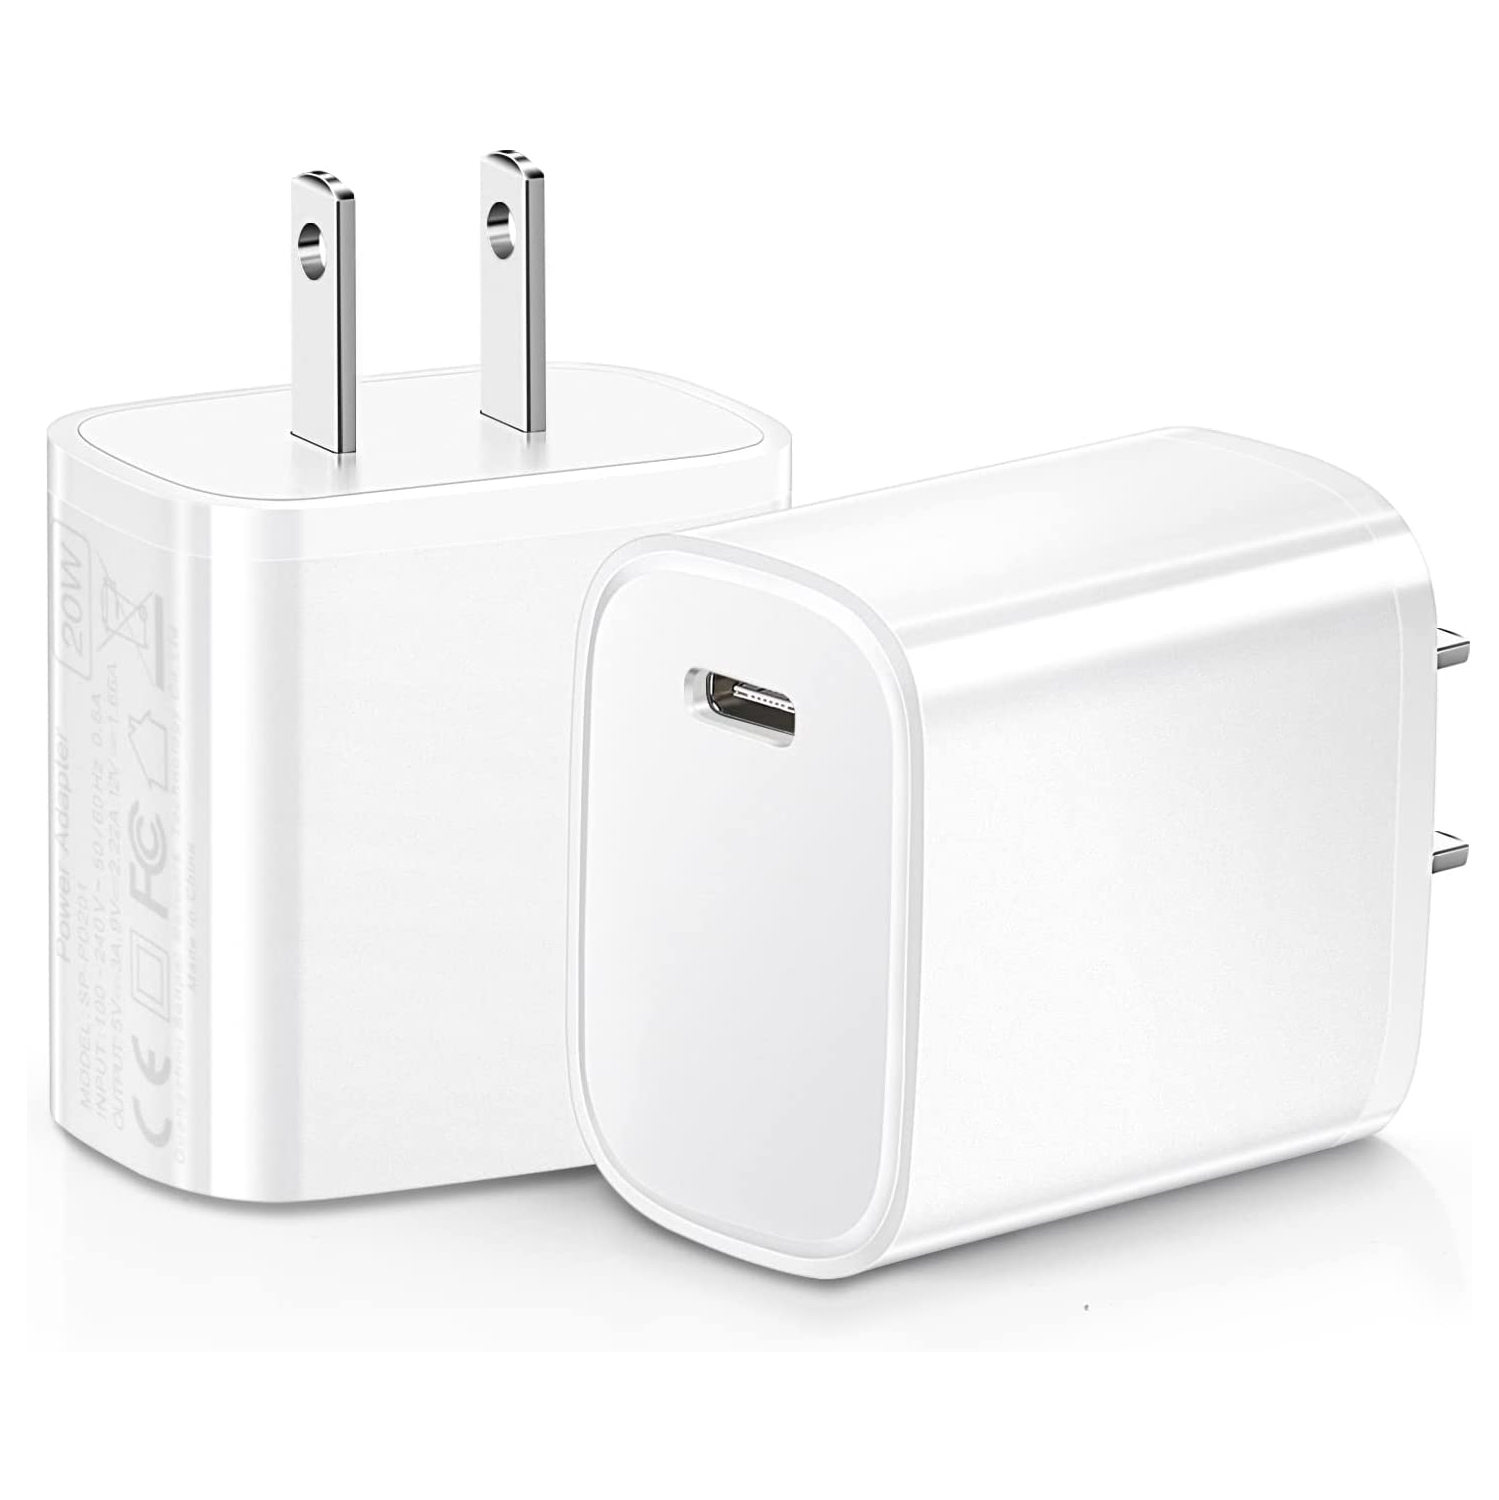 USB C Charger, USBC Charger Brick 2Pack, 20W iPhone 12 13 Charger Block, Type C PD Power Adapter Wall Plug